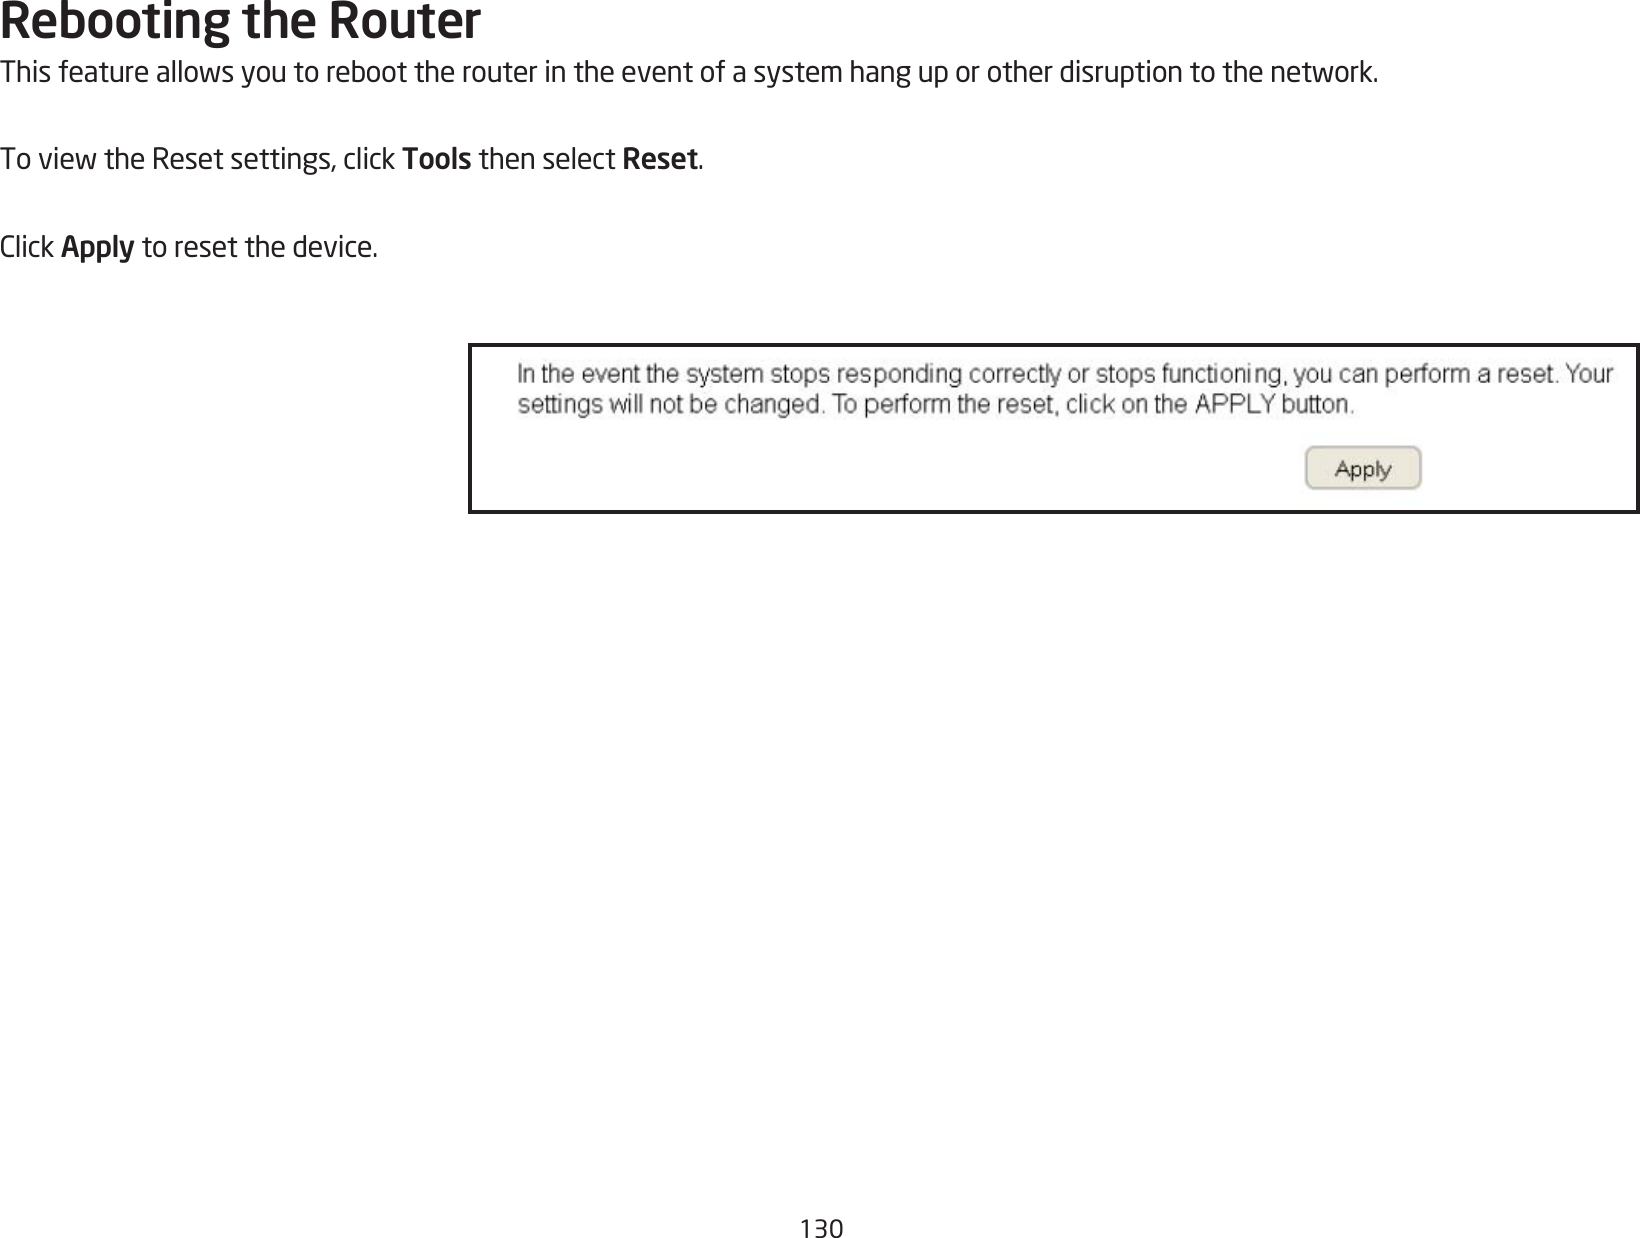 130Rebooting the RouterThisfeatureallowsyoutoreboottherouterintheeventofasystemhanguporotherdisruptiontothenetwork.ToviewtheResetsettings,clickTools then select Reset.ClickApply to reset the device.